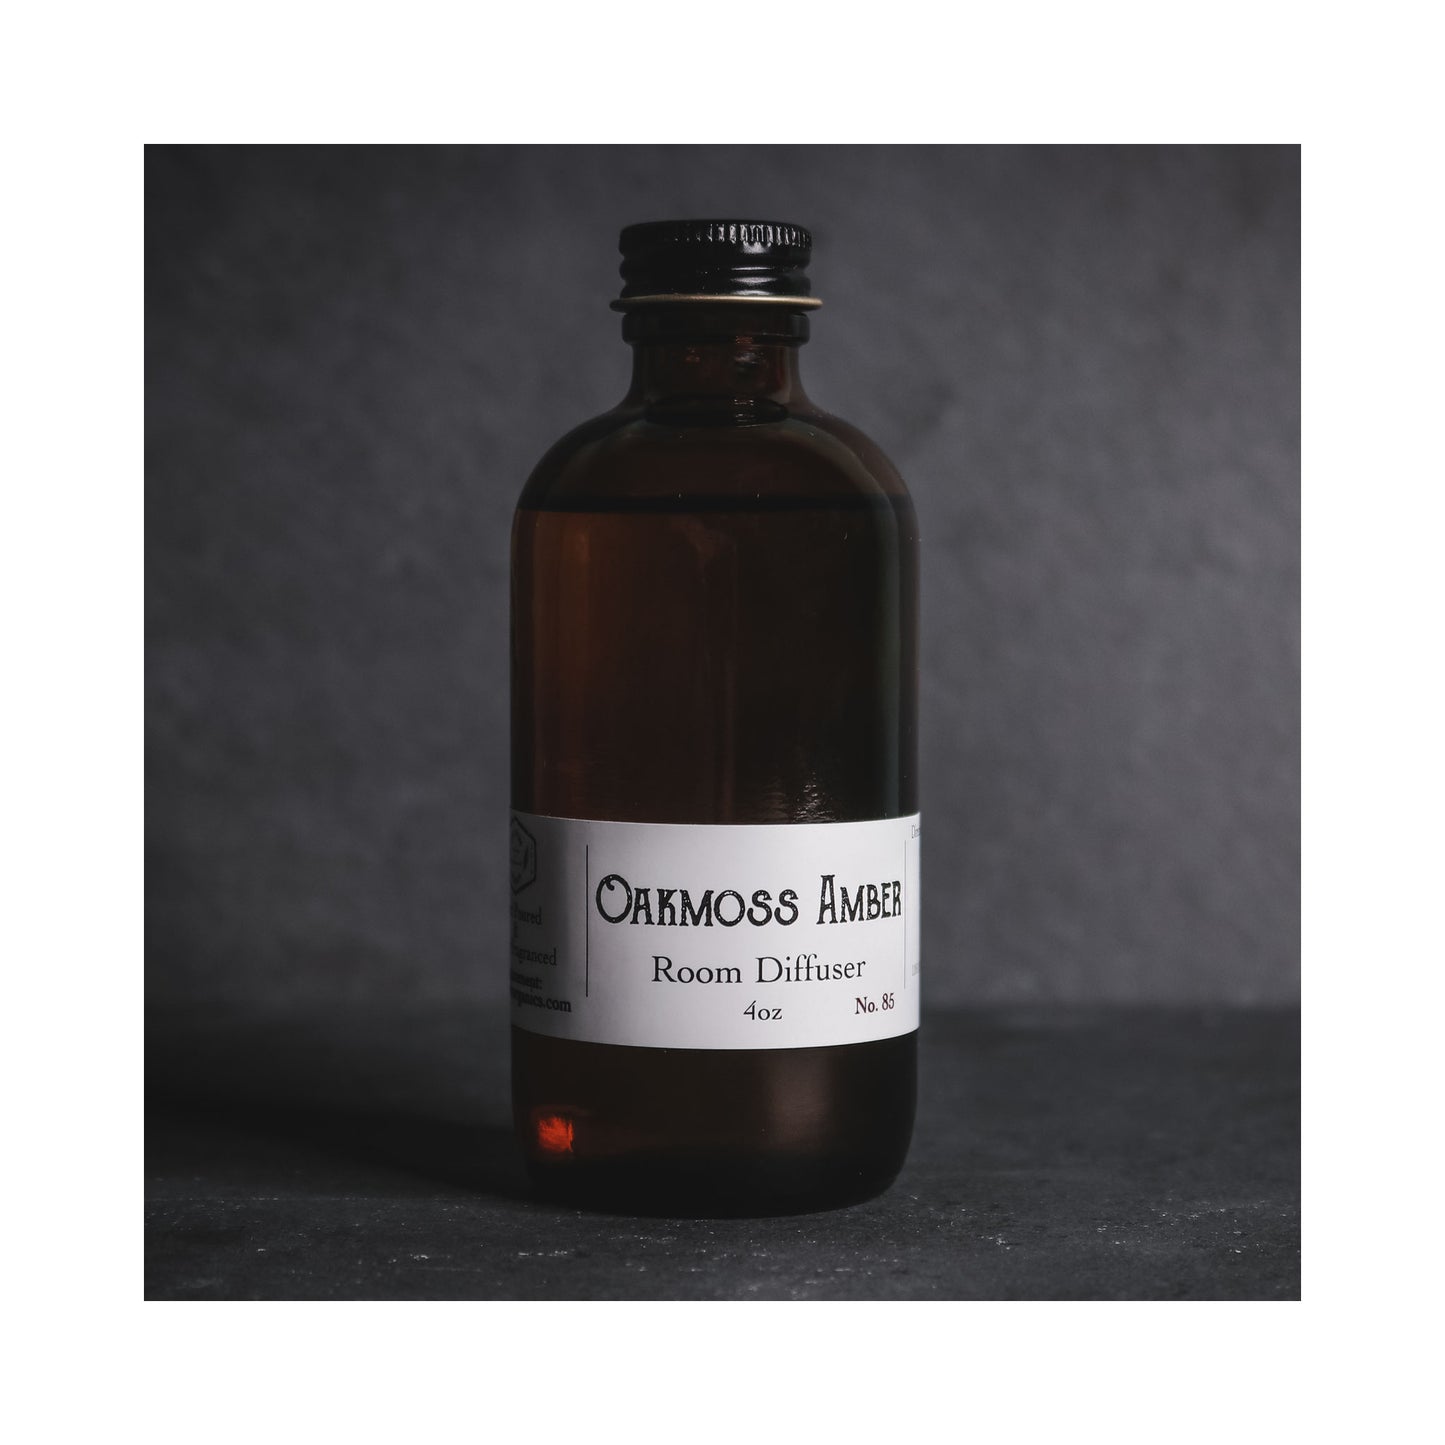 Oakmoss & Amber Room Diffuser with Top Quality Scents